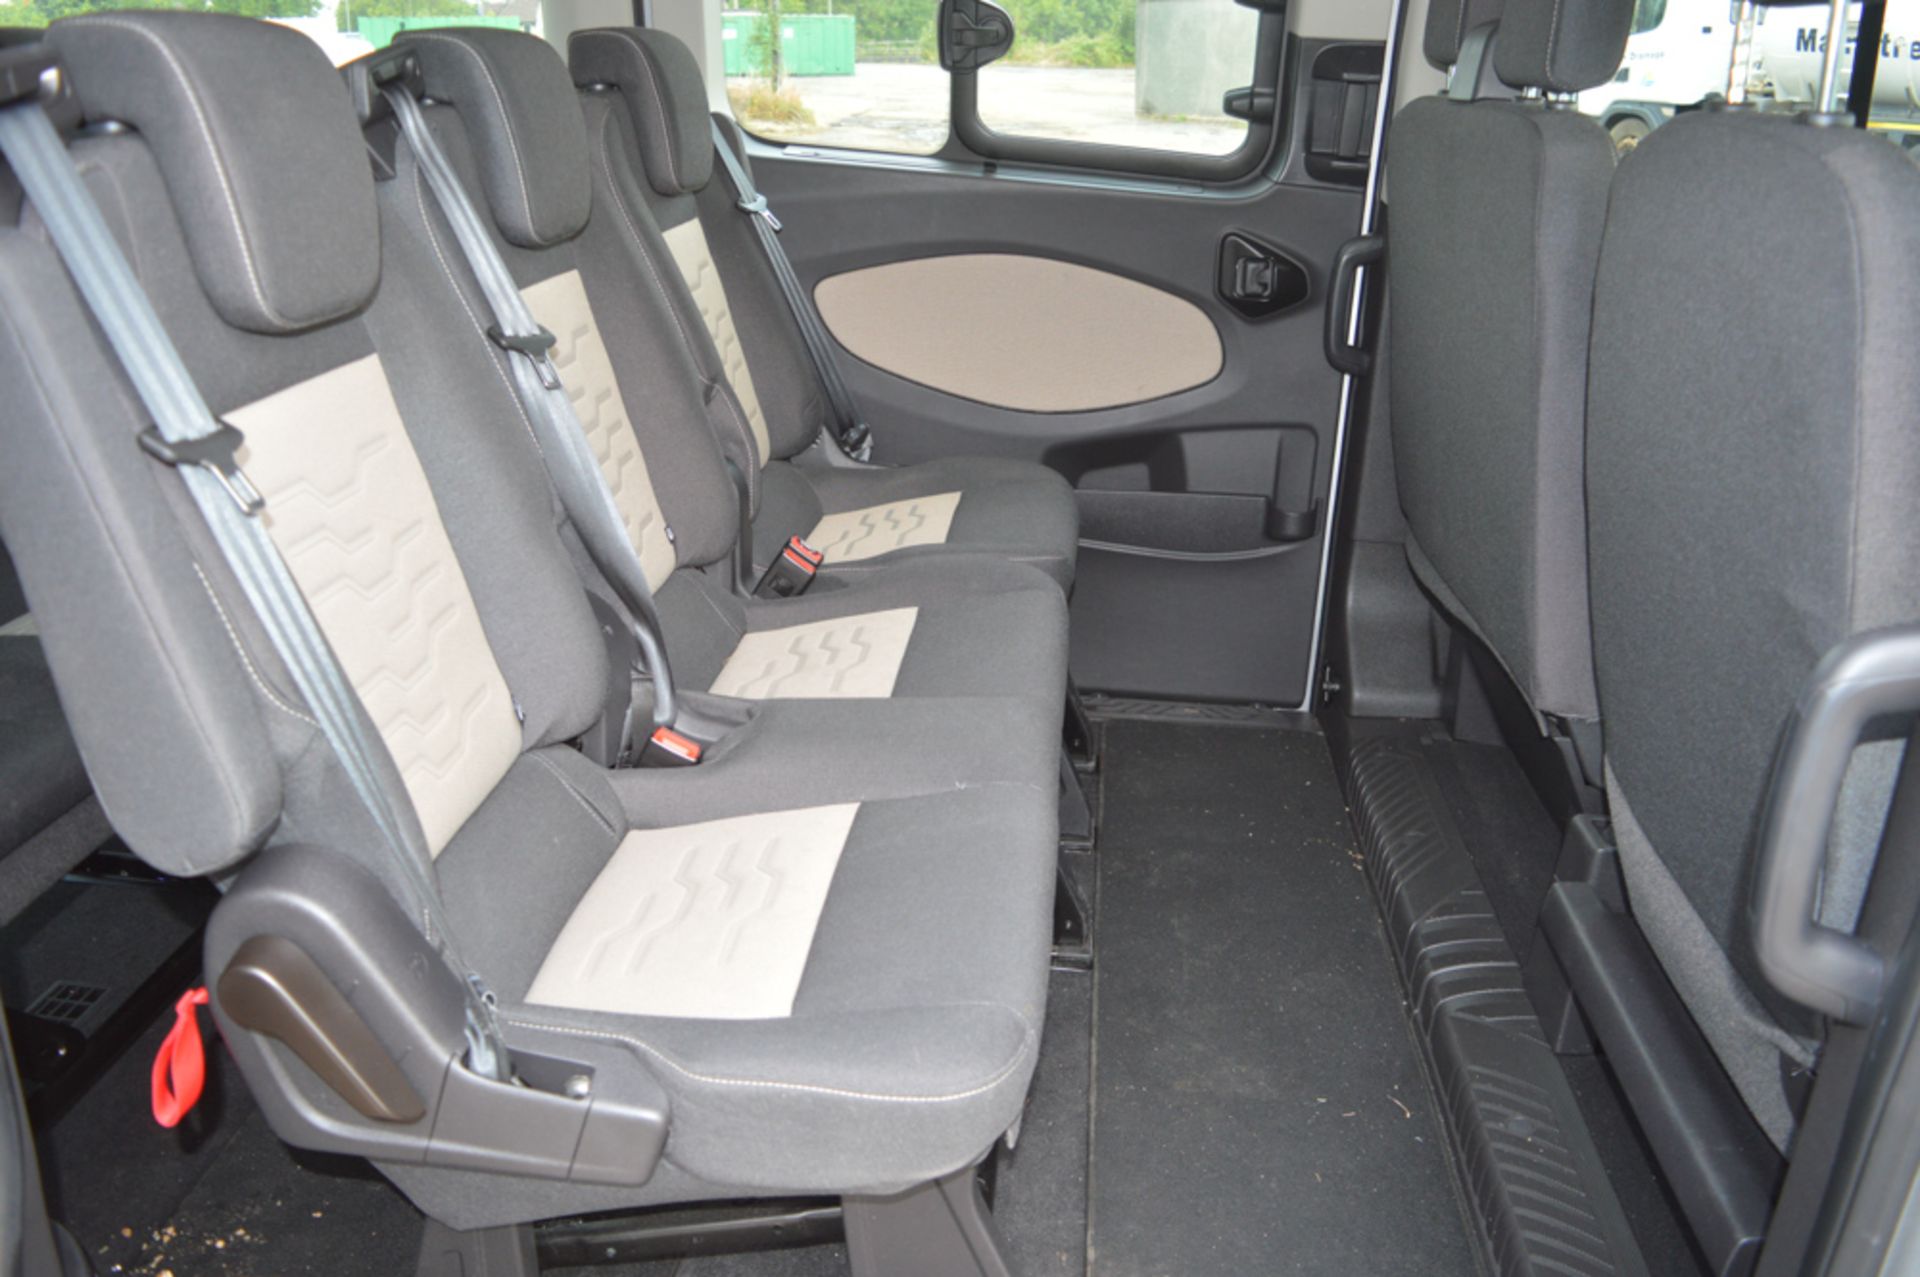 Ford Tourneo Custom 8 seat minibus  Registration Number: YD66 DRO  Date of Registration: 01/09/ - Image 15 of 15